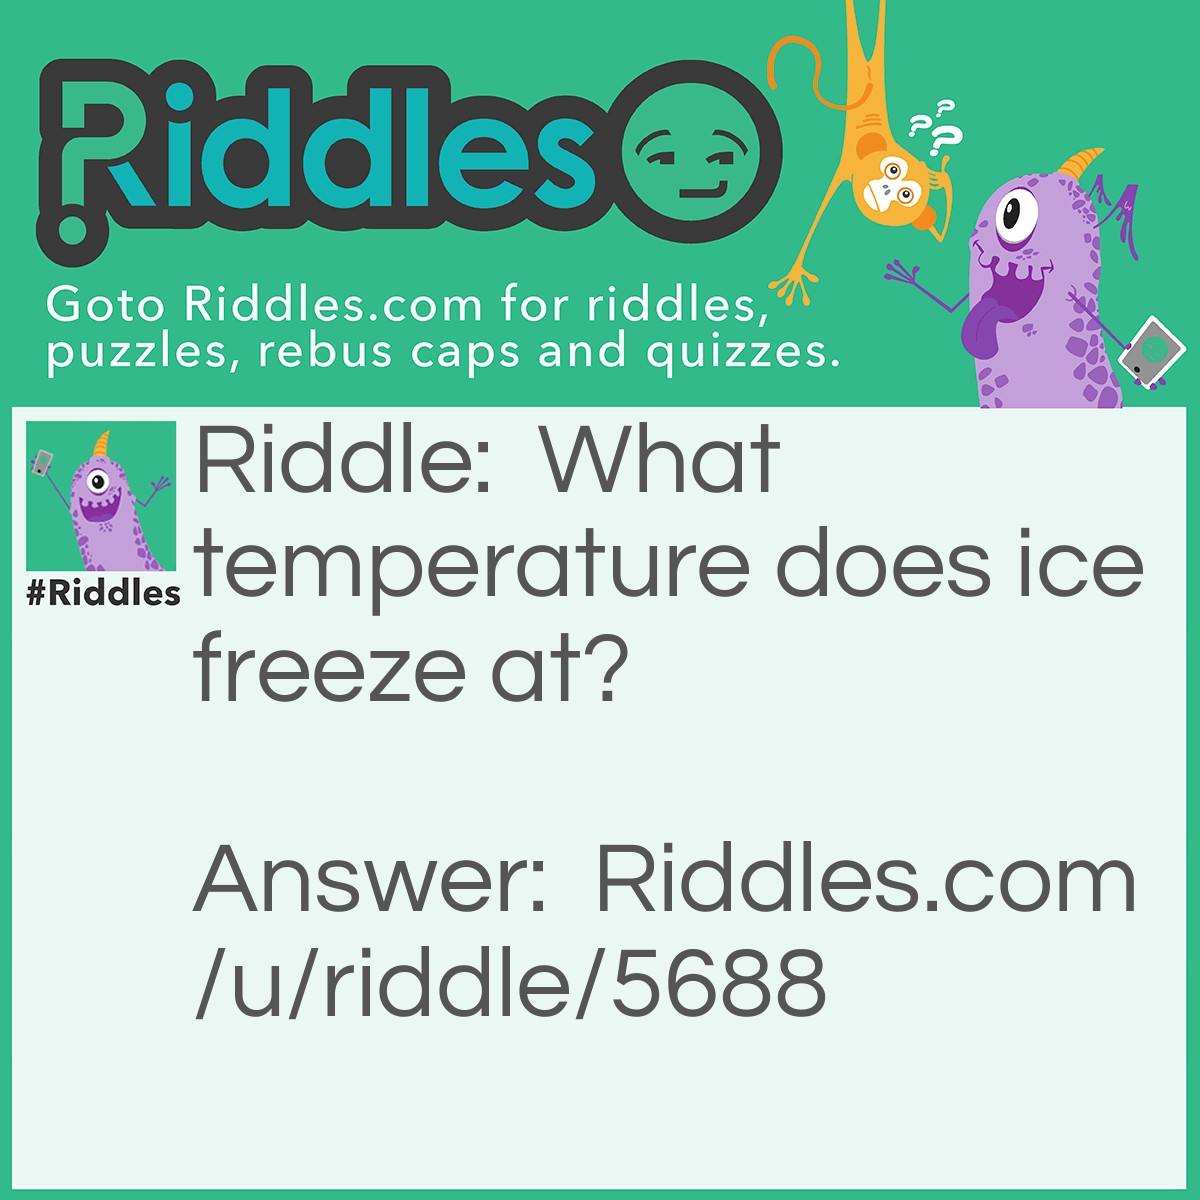 Riddle: What temperature does ice freeze at? Answer: Ice doesn’t freeze, it’s already frozen.